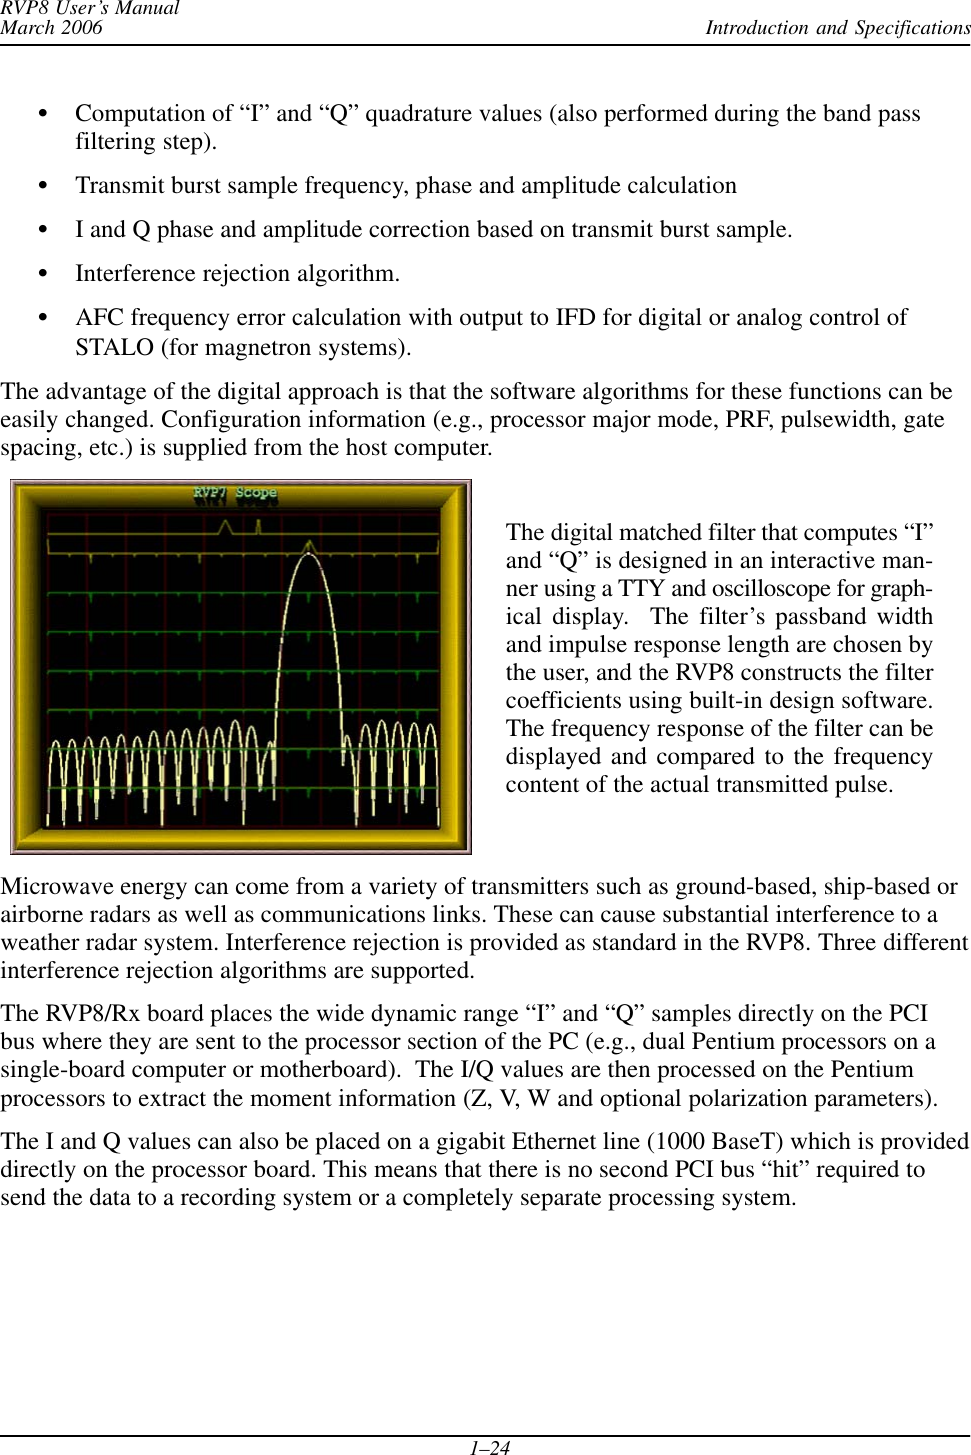 Introduction and SpecificationsRVP8 User’s ManualMarch 20061–24SComputation of “I” and “Q” quadrature values (also performed during the band passfiltering step).STransmit burst sample frequency, phase and amplitude calculationSI and Q phase and amplitude correction based on transmit burst sample.SInterference rejection algorithm.SAFC frequency error calculation with output to IFD for digital or analog control ofSTALO (for magnetron systems).The advantage of the digital approach is that the software algorithms for these functions can beeasily changed. Configuration information (e.g., processor major mode, PRF, pulsewidth, gatespacing, etc.) is supplied from the host computer.The digital matched filter that computes “I”and “Q” is designed in an interactive man-ner using a TTY and oscilloscope for graph-ical display.  The filter’s passband widthand impulse response length are chosen bythe user, and the RVP8 constructs the filtercoefficients using built-in design software.The frequency response of the filter can bedisplayed and compared to the frequencycontent of the actual transmitted pulse.Microwave energy can come from a variety of transmitters such as ground-based, ship-based orairborne radars as well as communications links. These can cause substantial interference to aweather radar system. Interference rejection is provided as standard in the RVP8. Three differentinterference rejection algorithms are supported.The RVP8/Rx board places the wide dynamic range “I” and “Q” samples directly on the PCIbus where they are sent to the processor section of the PC (e.g., dual Pentium processors on asingle-board computer or motherboard).  The I/Q values are then processed on the Pentiumprocessors to extract the moment information (Z, V, W and optional polarization parameters).The I and Q values can also be placed on a gigabit Ethernet line (1000 BaseT) which is provideddirectly on the processor board. This means that there is no second PCI bus “hit” required tosend the data to a recording system or a completely separate processing system.